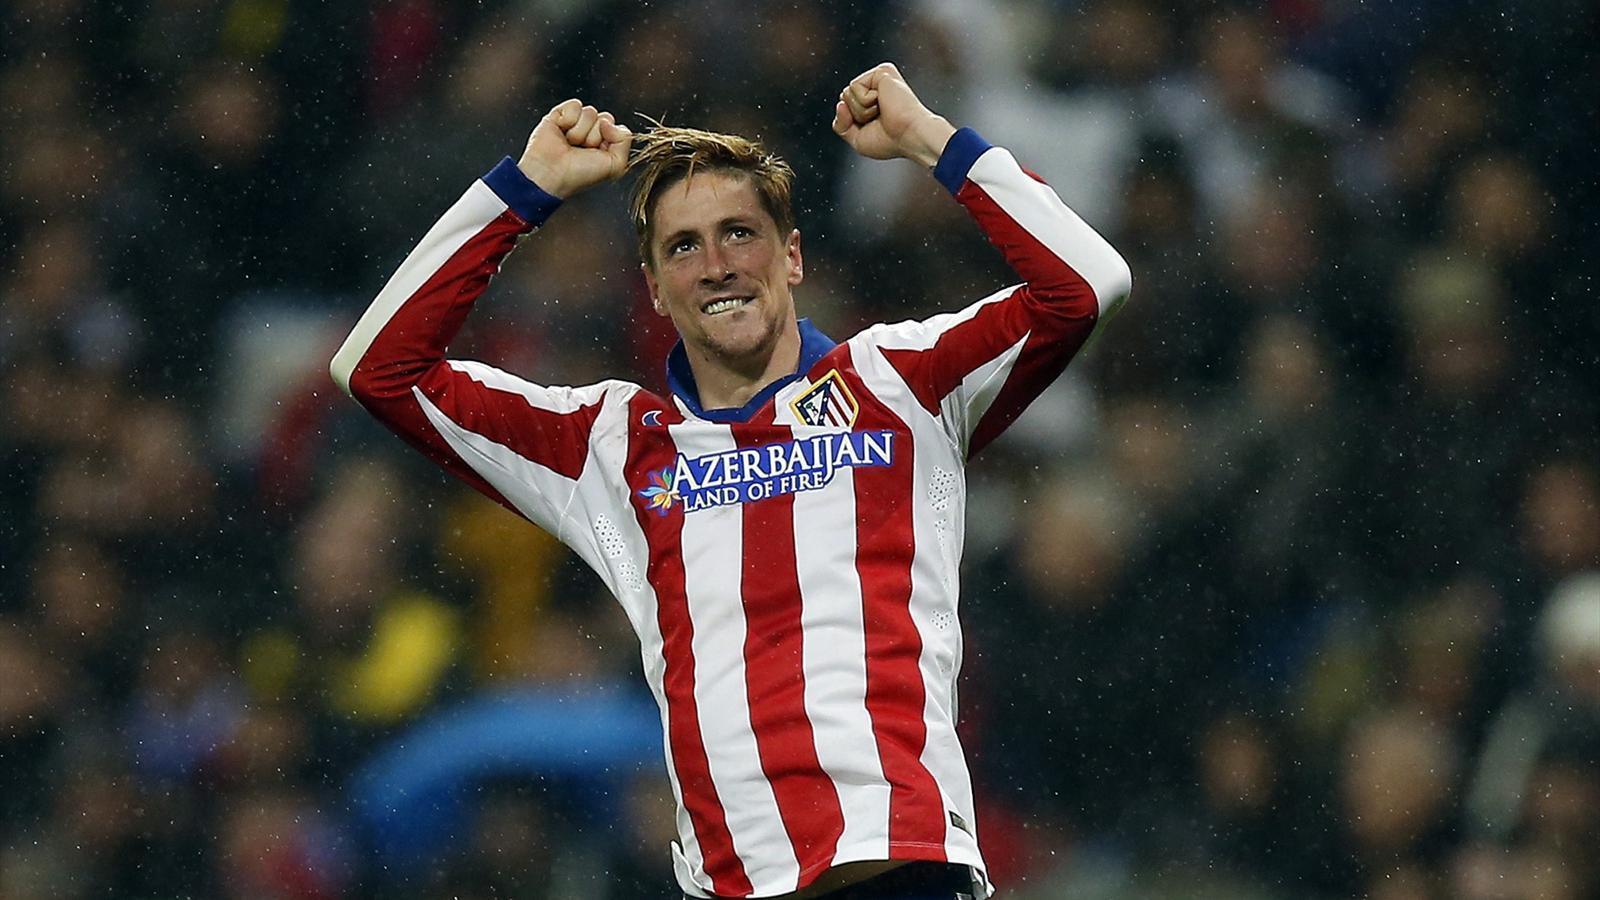 Fernando Torres bags brace as Atletico oust Real Madrid